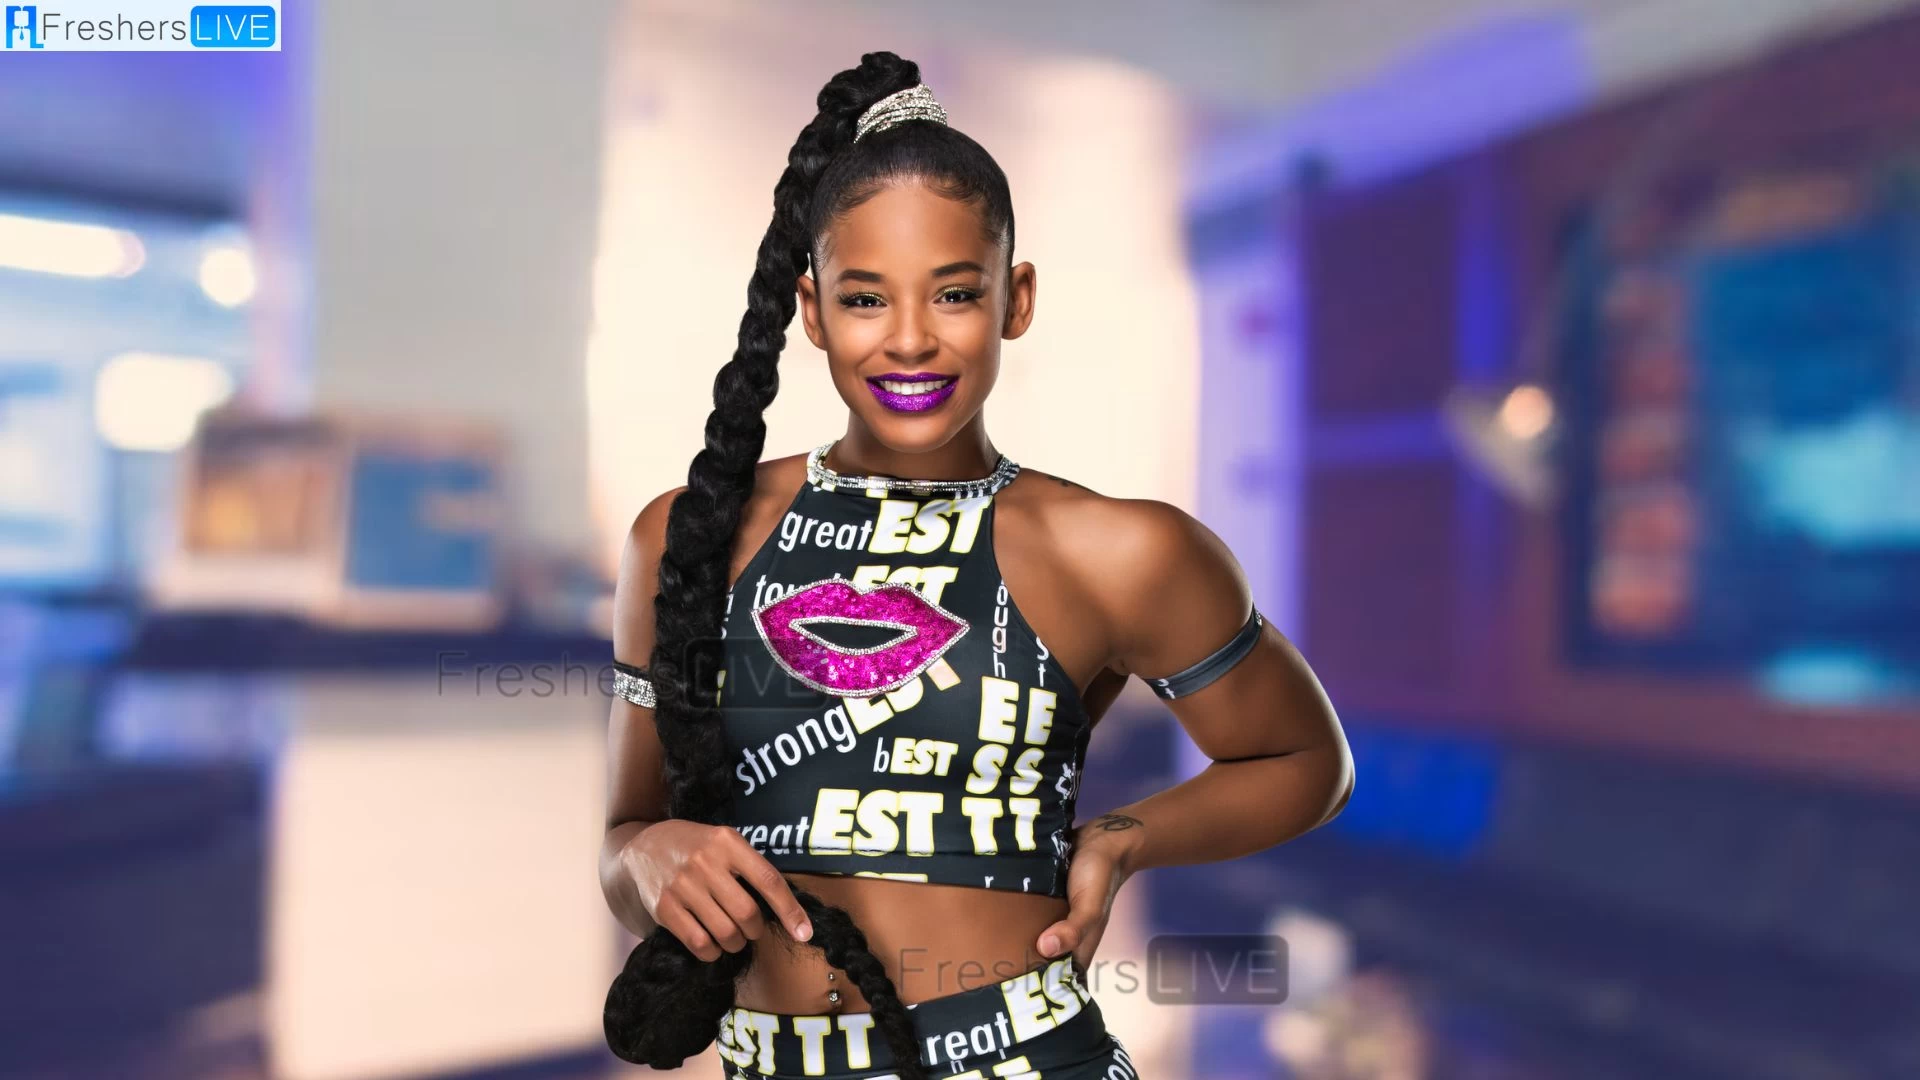 Where is Bianca Belair Now? Who is Bianca Belair?